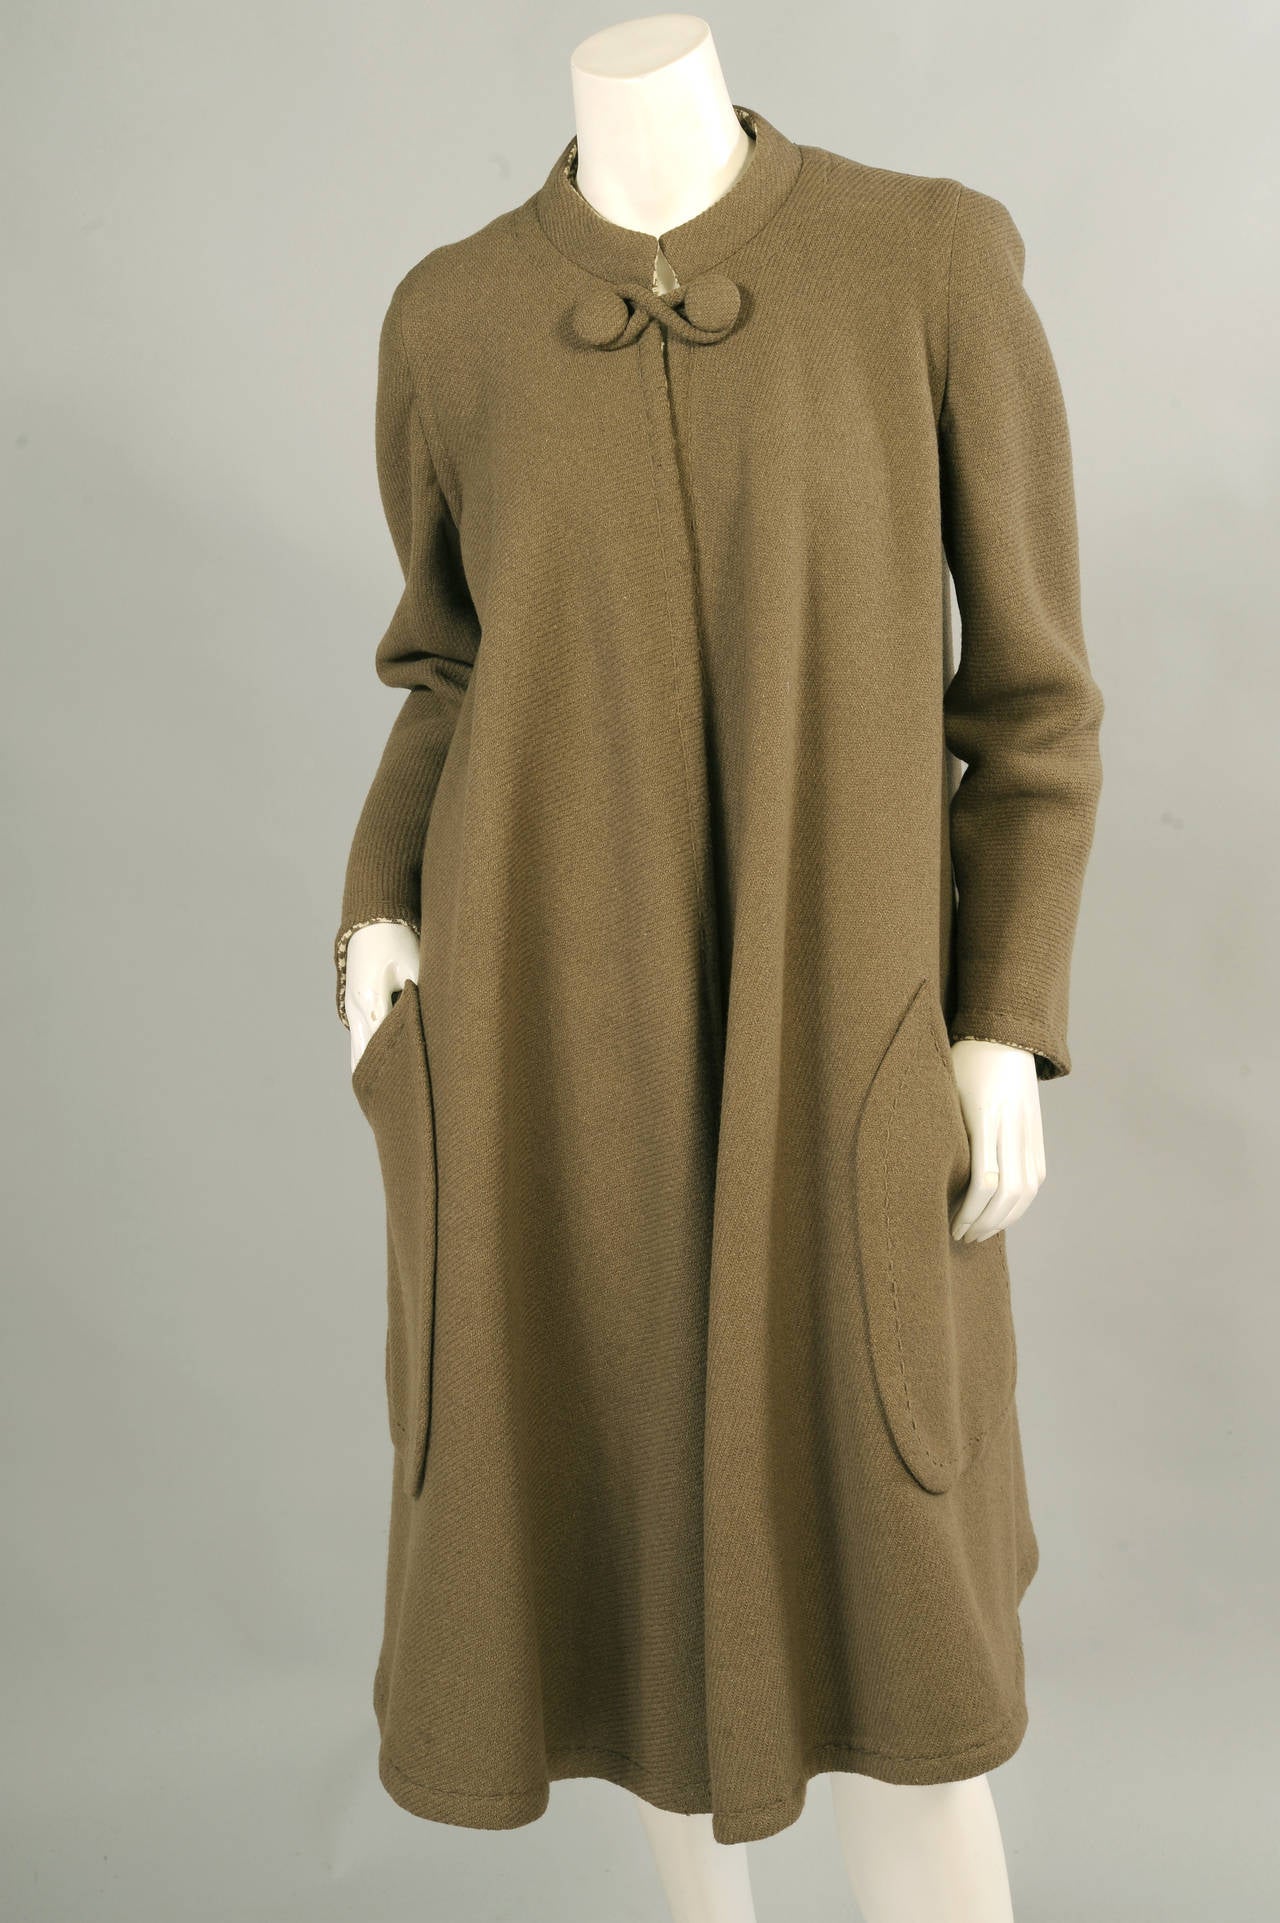 Sybil Connolly, the famous Irish couturiere was well known for using fabrics that were from her native country. The beautiful  green wools in this outfit are excellent examples. The reversible coat is olive green wool with a delicate woven pattern